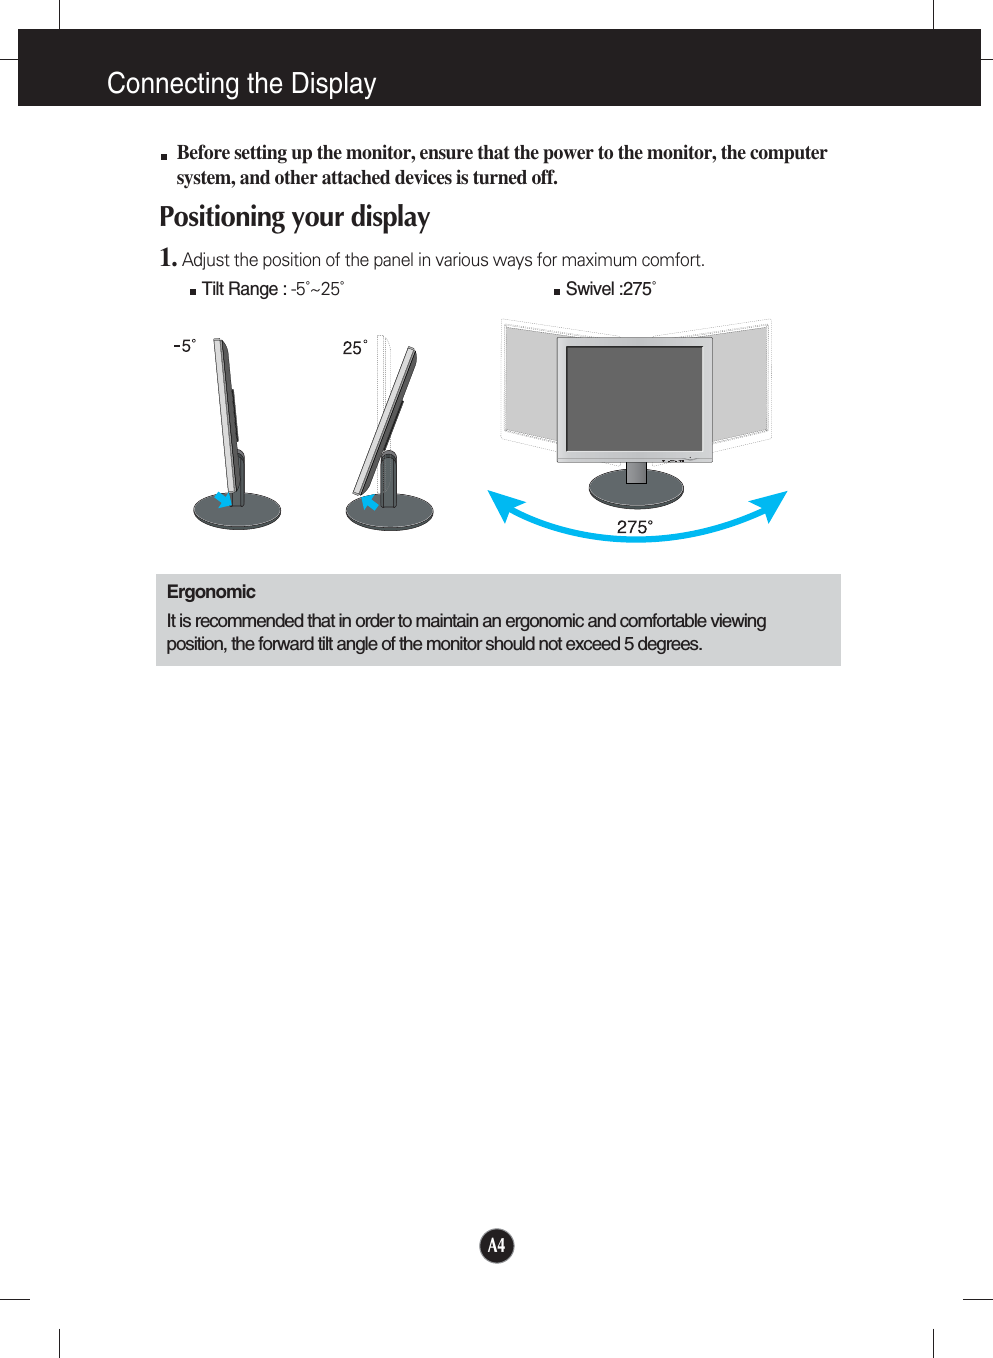 A4Connecting the DisplayBefore setting up the monitor, ensure that the power to the monitor, the computersystem, and other attached devices is turned off. Positioning your display1. Adjust the position of the panel in various ways for maximum comfort.Tilt Range : -5˚~25˚                             Swivel :275˚ErgonomicIt is recommended that in order to maintain an ergonomic and comfortable viewingposition, the forward tilt angle of the monitor should not exceed 5 degrees.